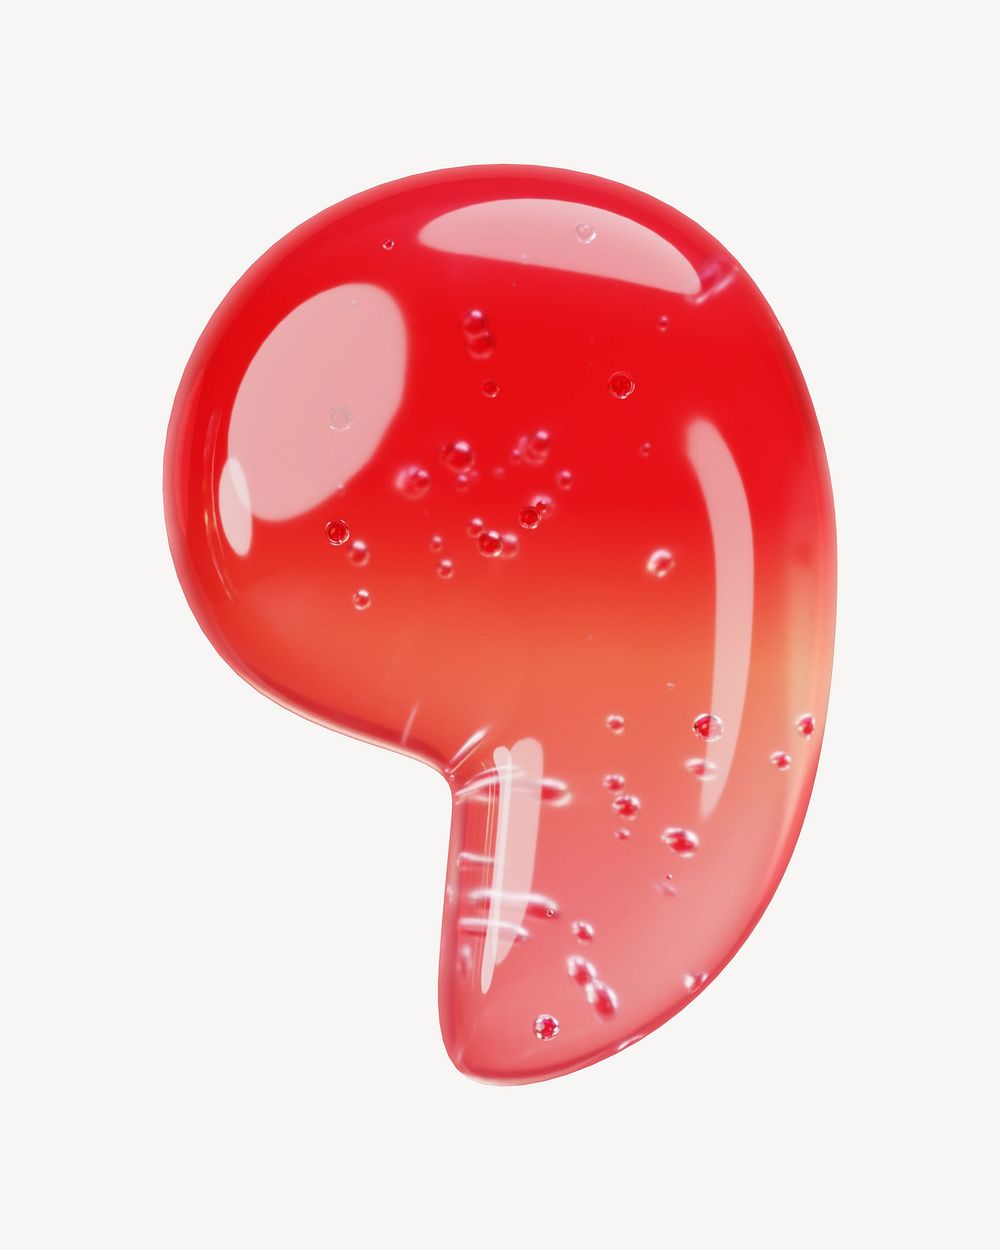 Apostrophe sign, 3D red jelly symbol illustration